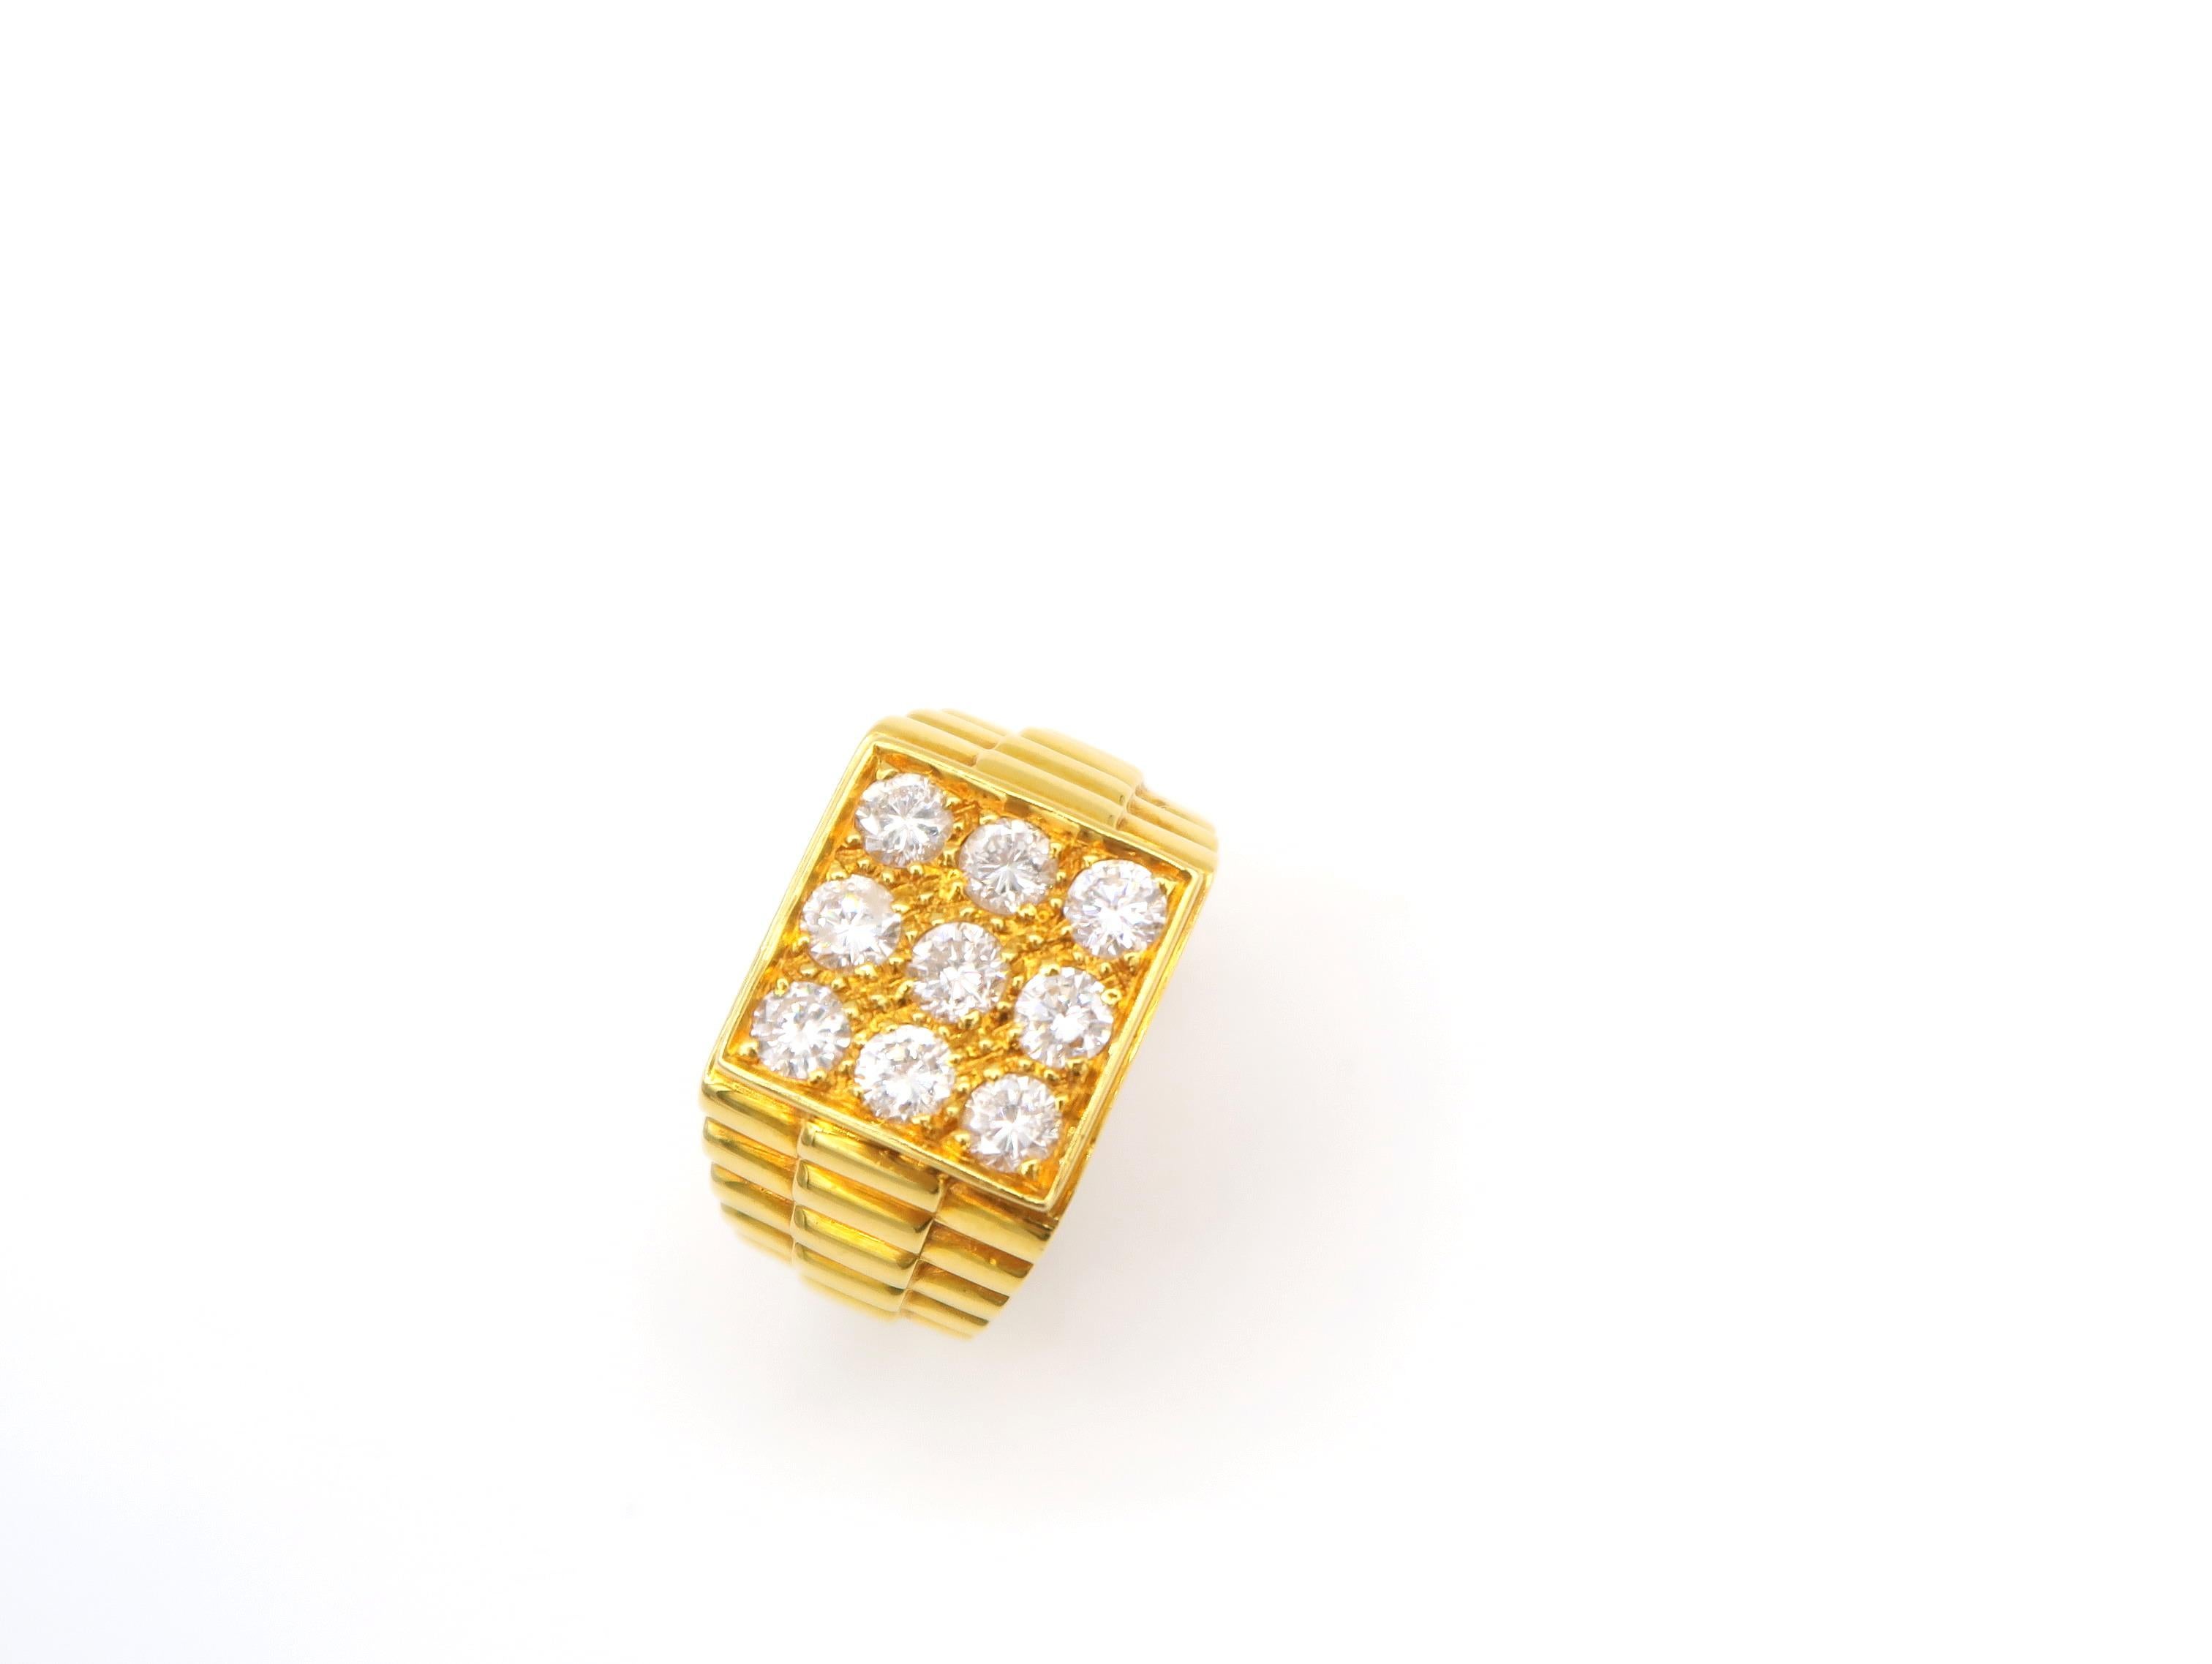 Square Faced 22 Karat Yellow Gold Mens Ring with Diamonds

Please let us know upon checkout should you wish to have the ring resized. 
Ring size: US 7.5, UK O

Diamond: 1.35ct.
Gold: 22K 17.44g.